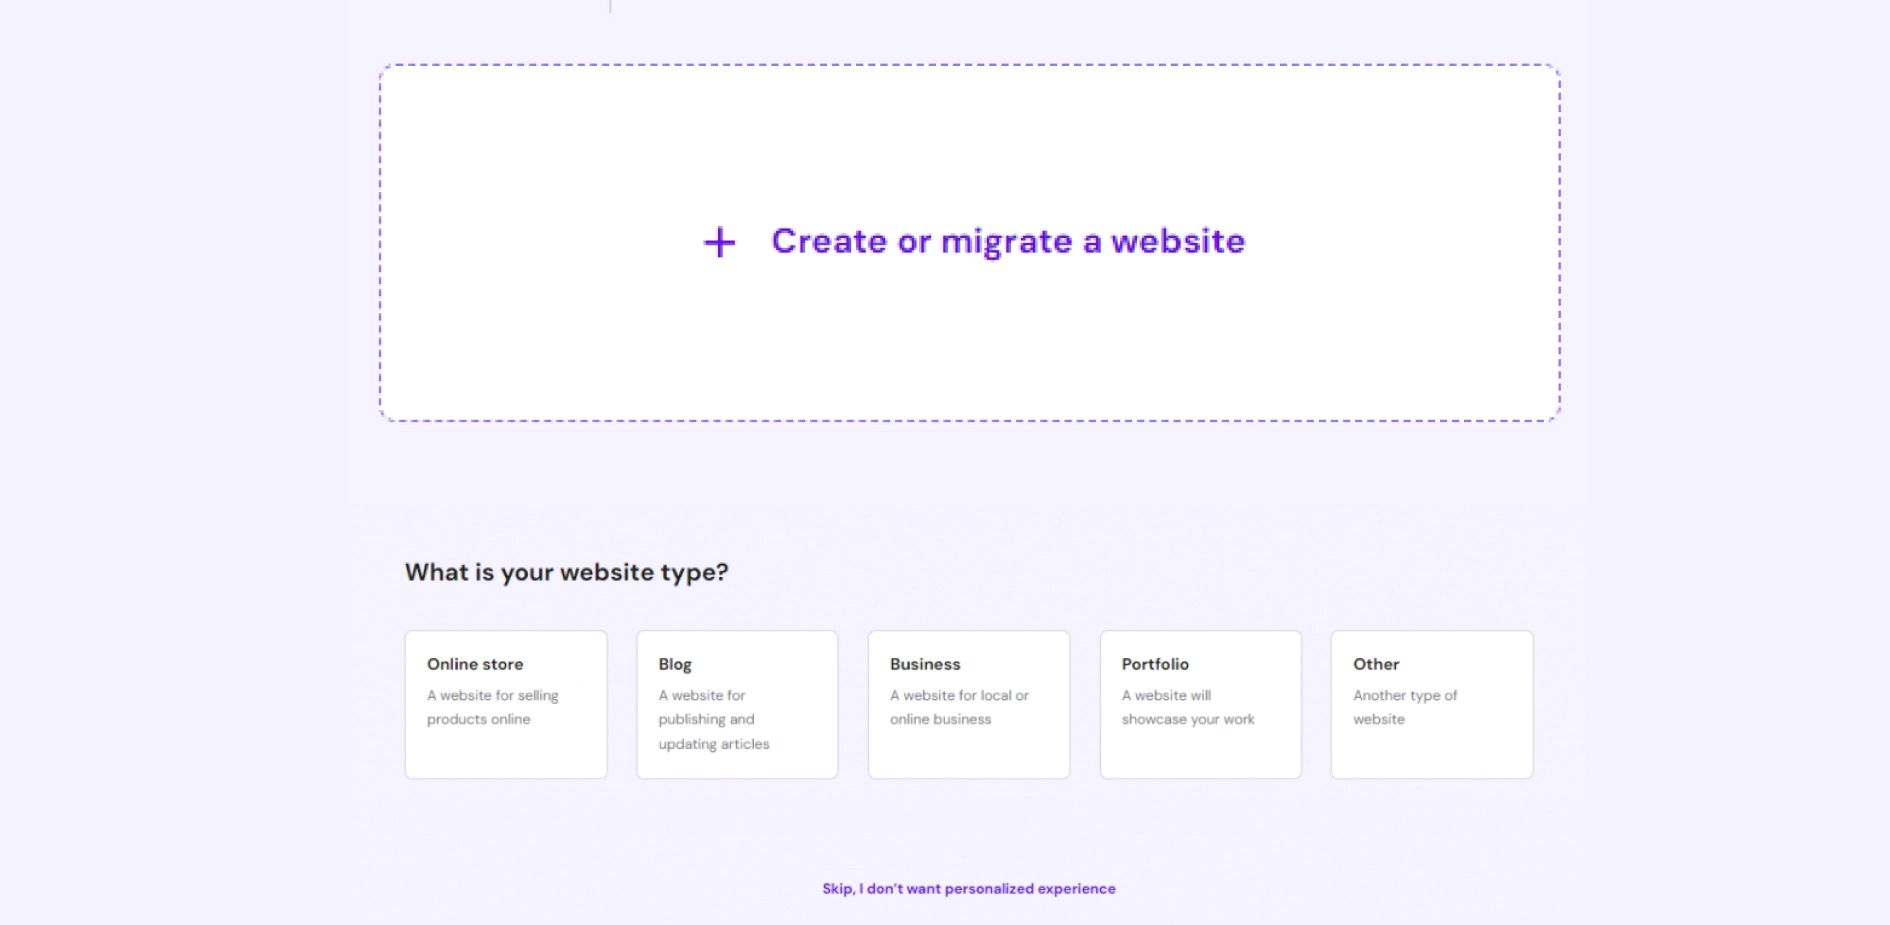 Homepage of a website with the text "Create or Create a Website" displayed prominently.